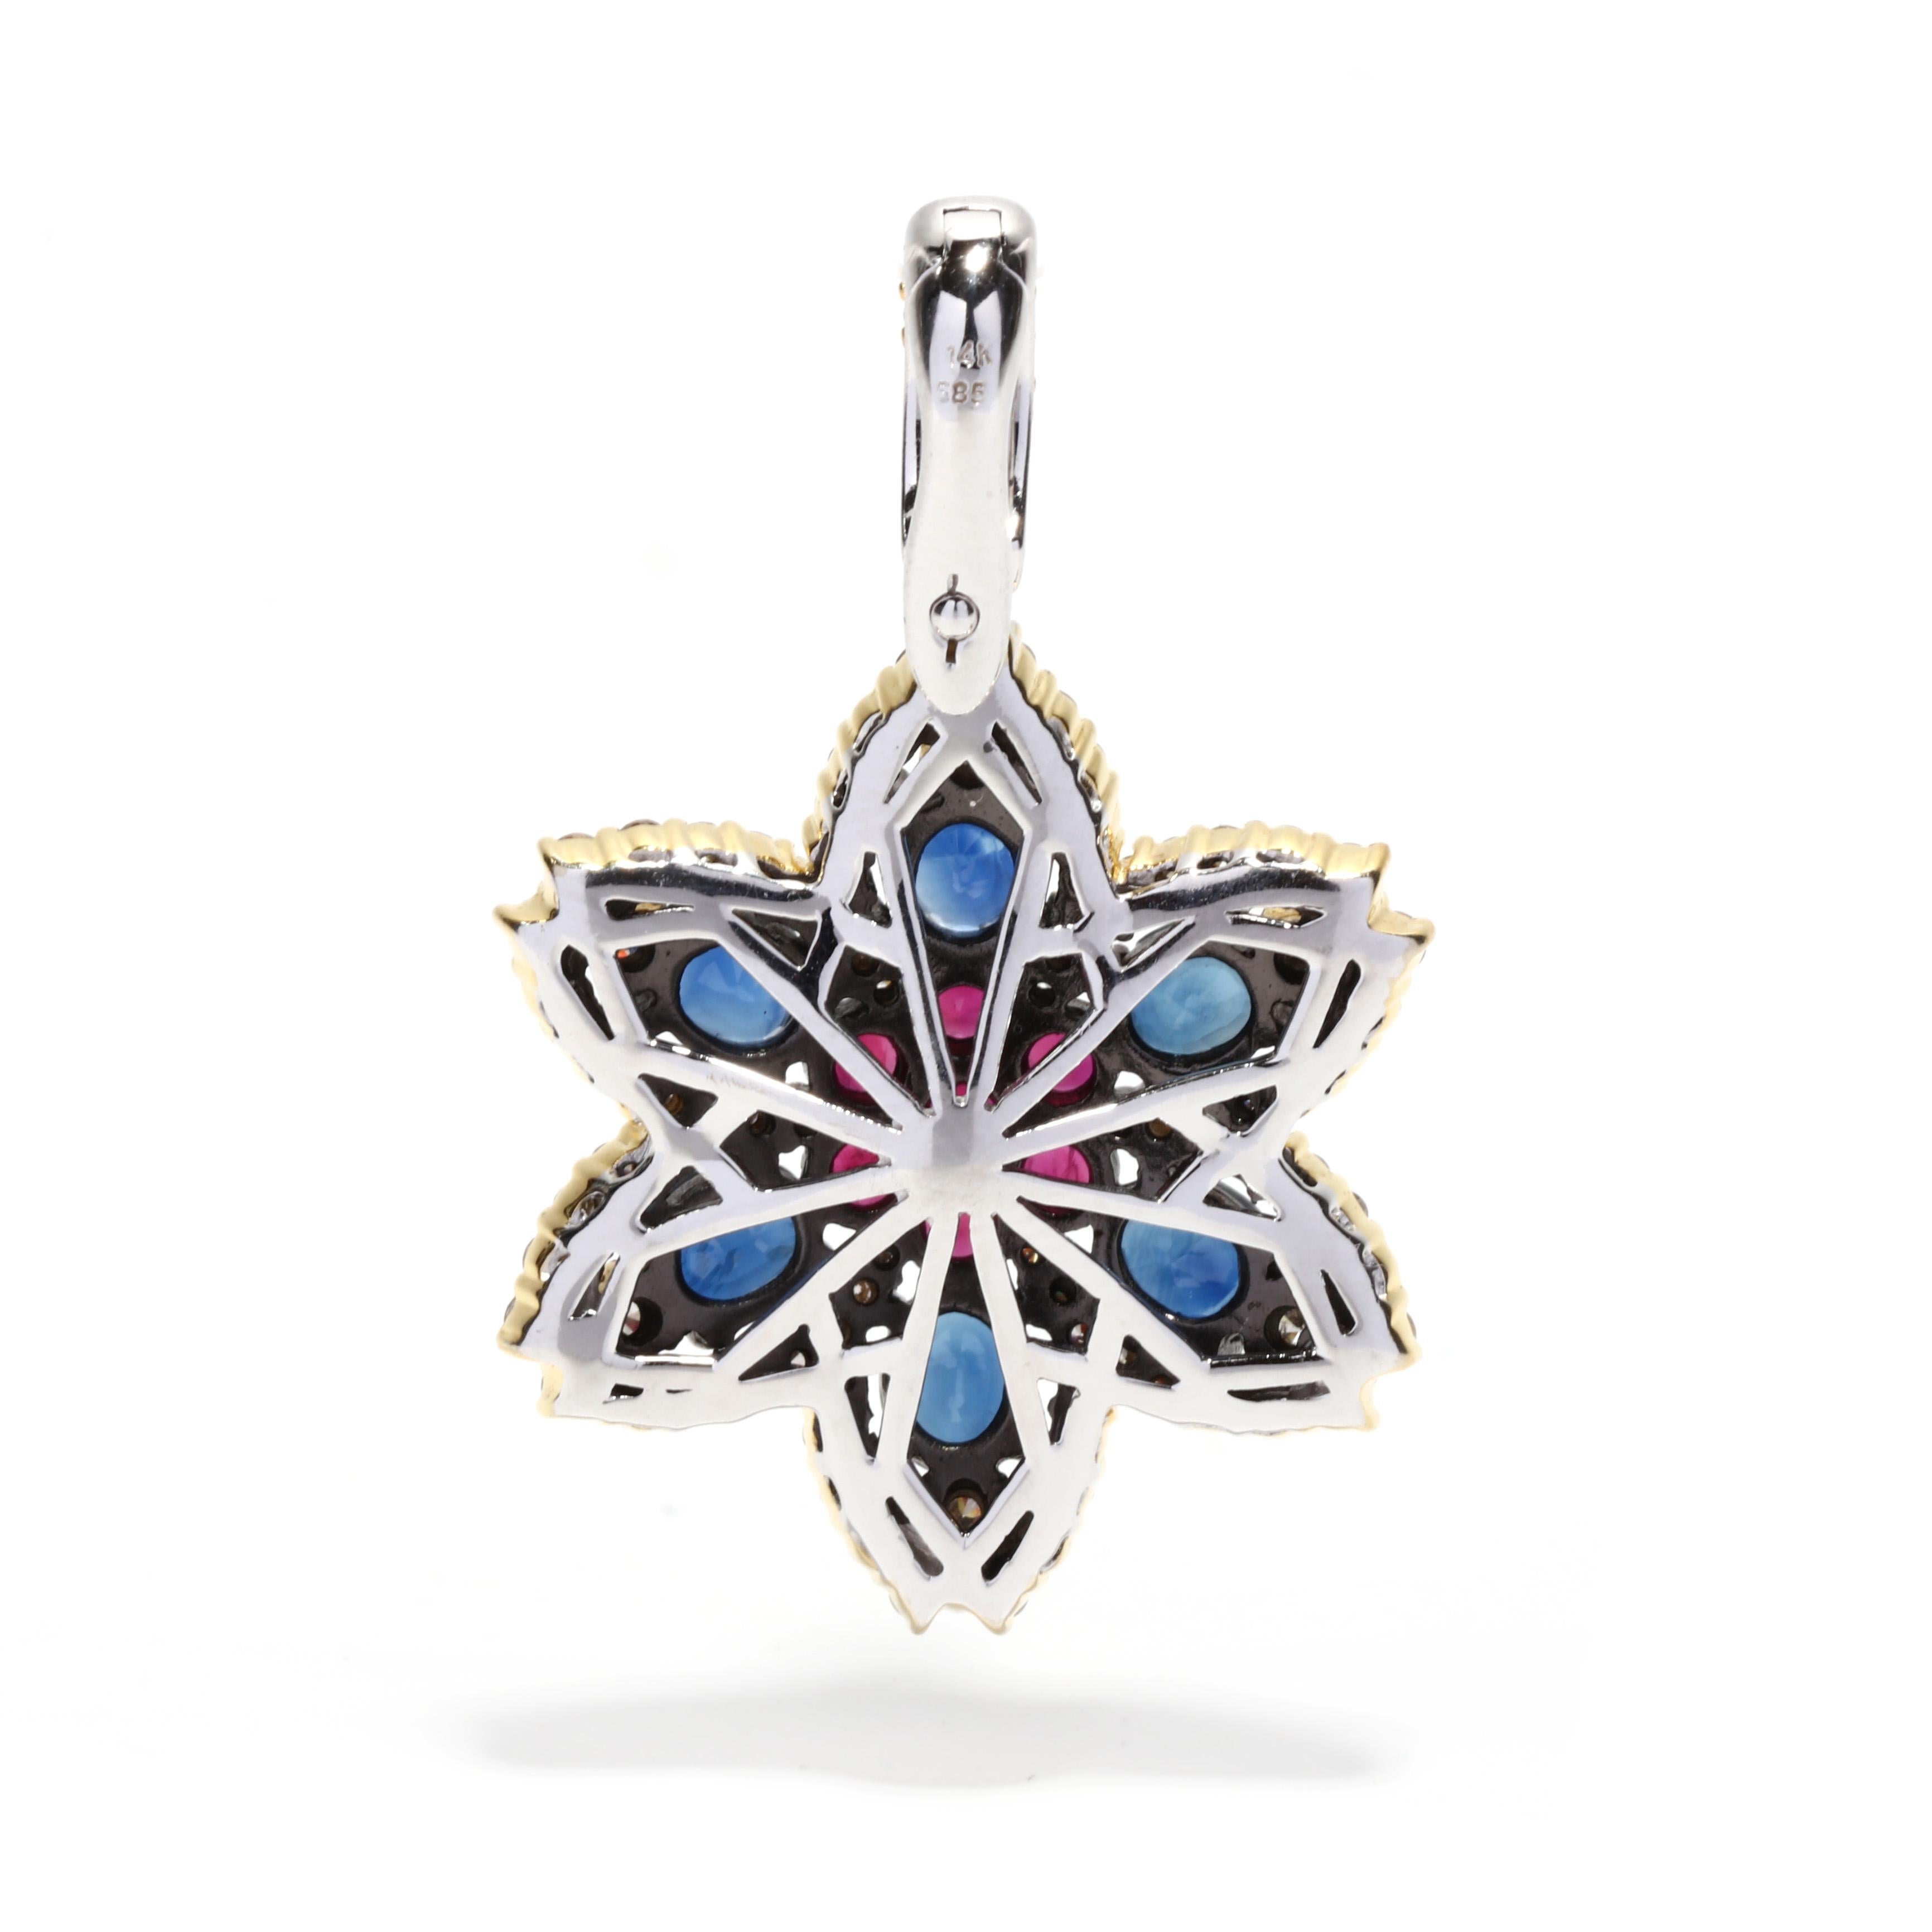 Add a little sparkle to your look with this stunning 5.25ctw Ruby Sapphire Diamond Flower Pendant Enhancer. Crafted from 14K yellow and white gold, this pendant enhancer features a beautiful diamond flower design with five round rubies and five